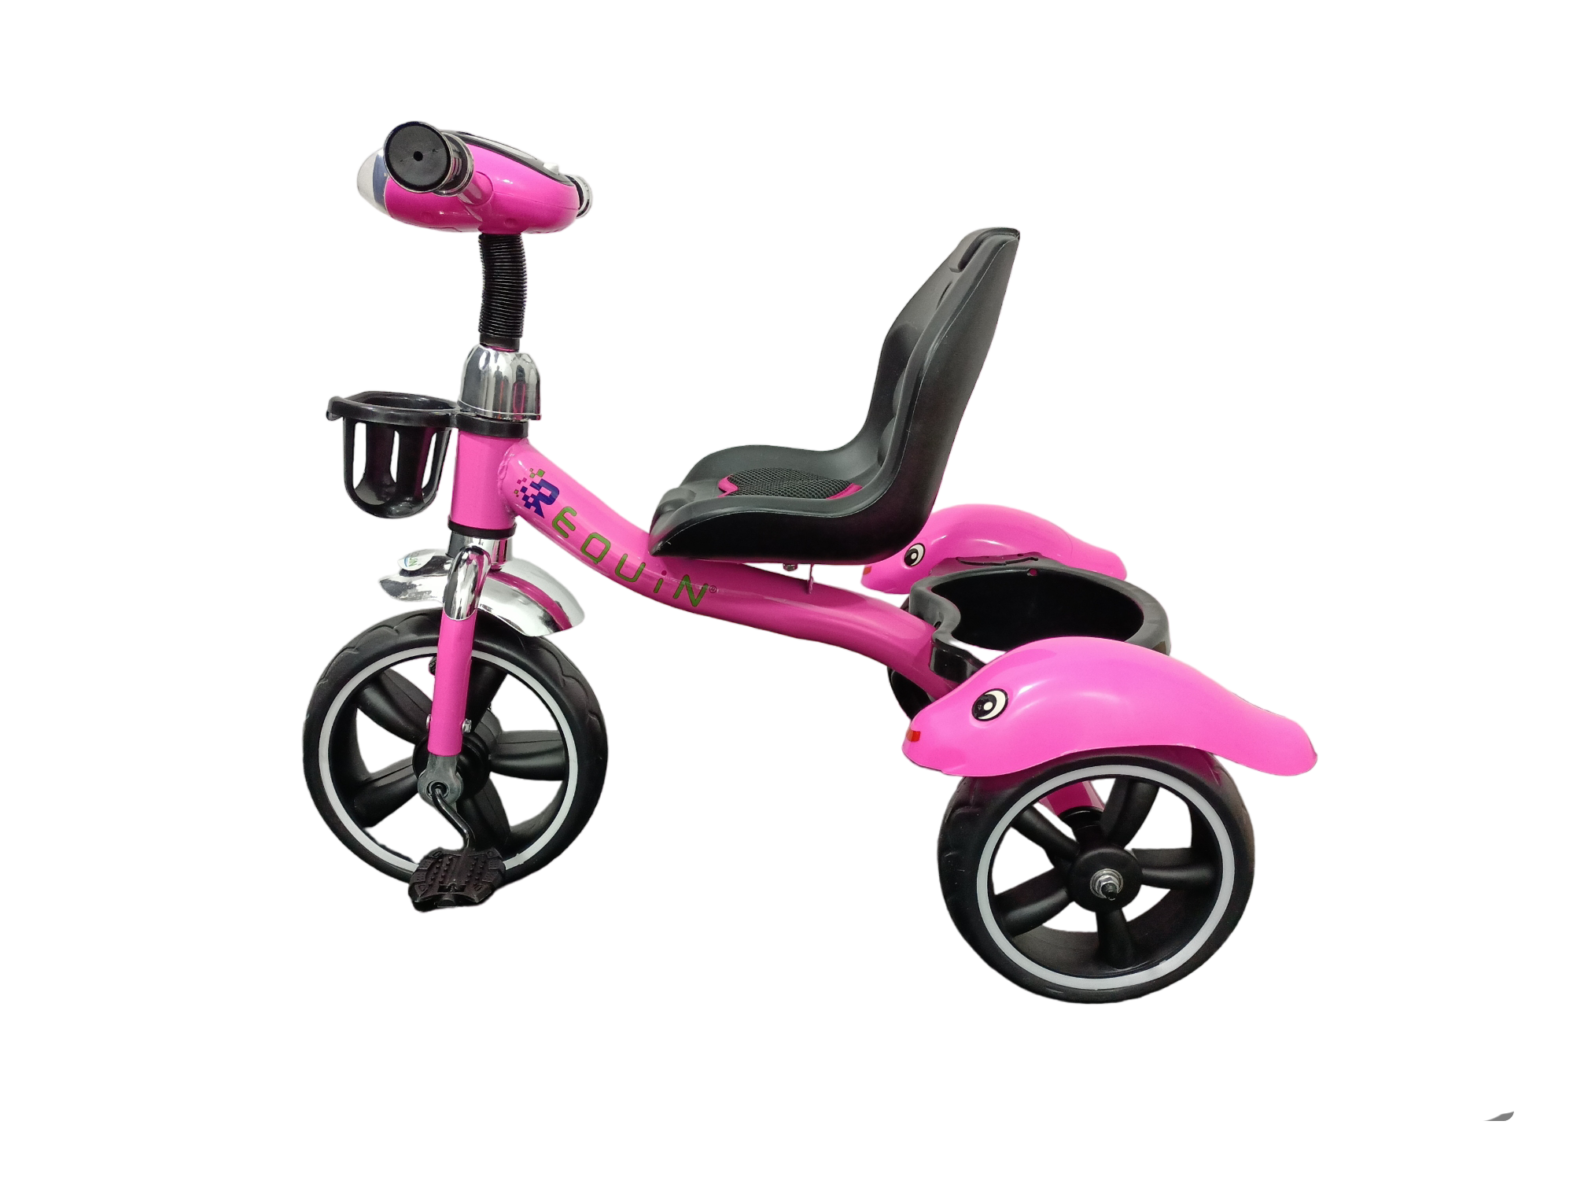 VELO TRICYCLE CONFORTABLE LUMINEUX MUSICAL4